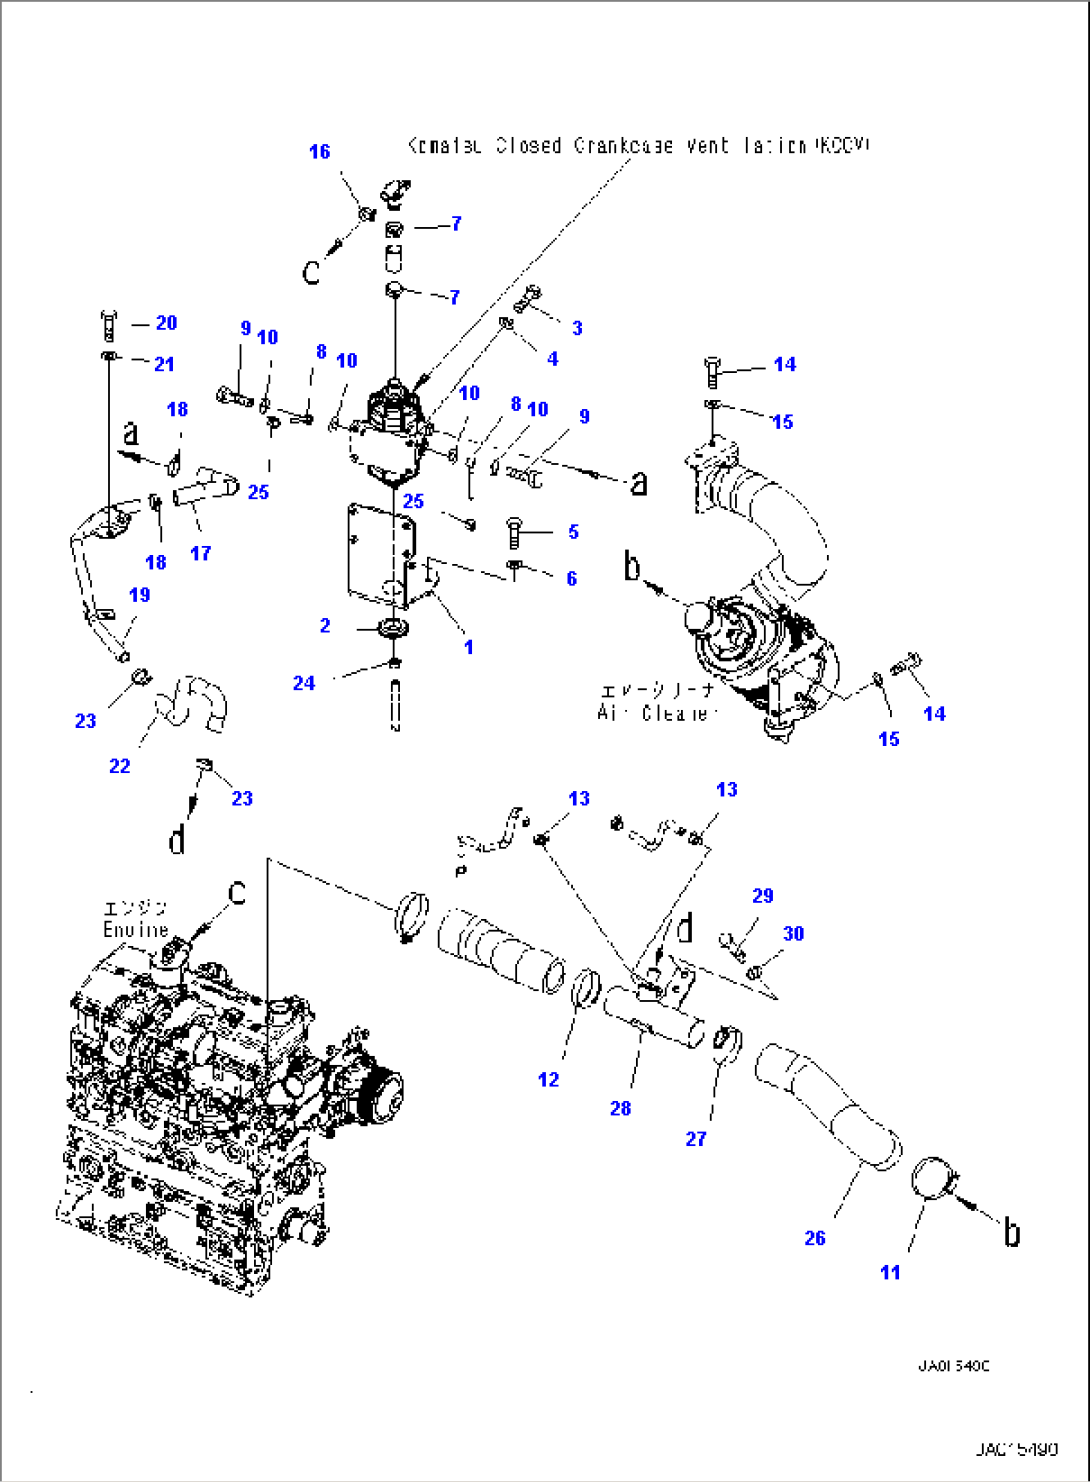 AIR CLEANER, RELATED PARTS